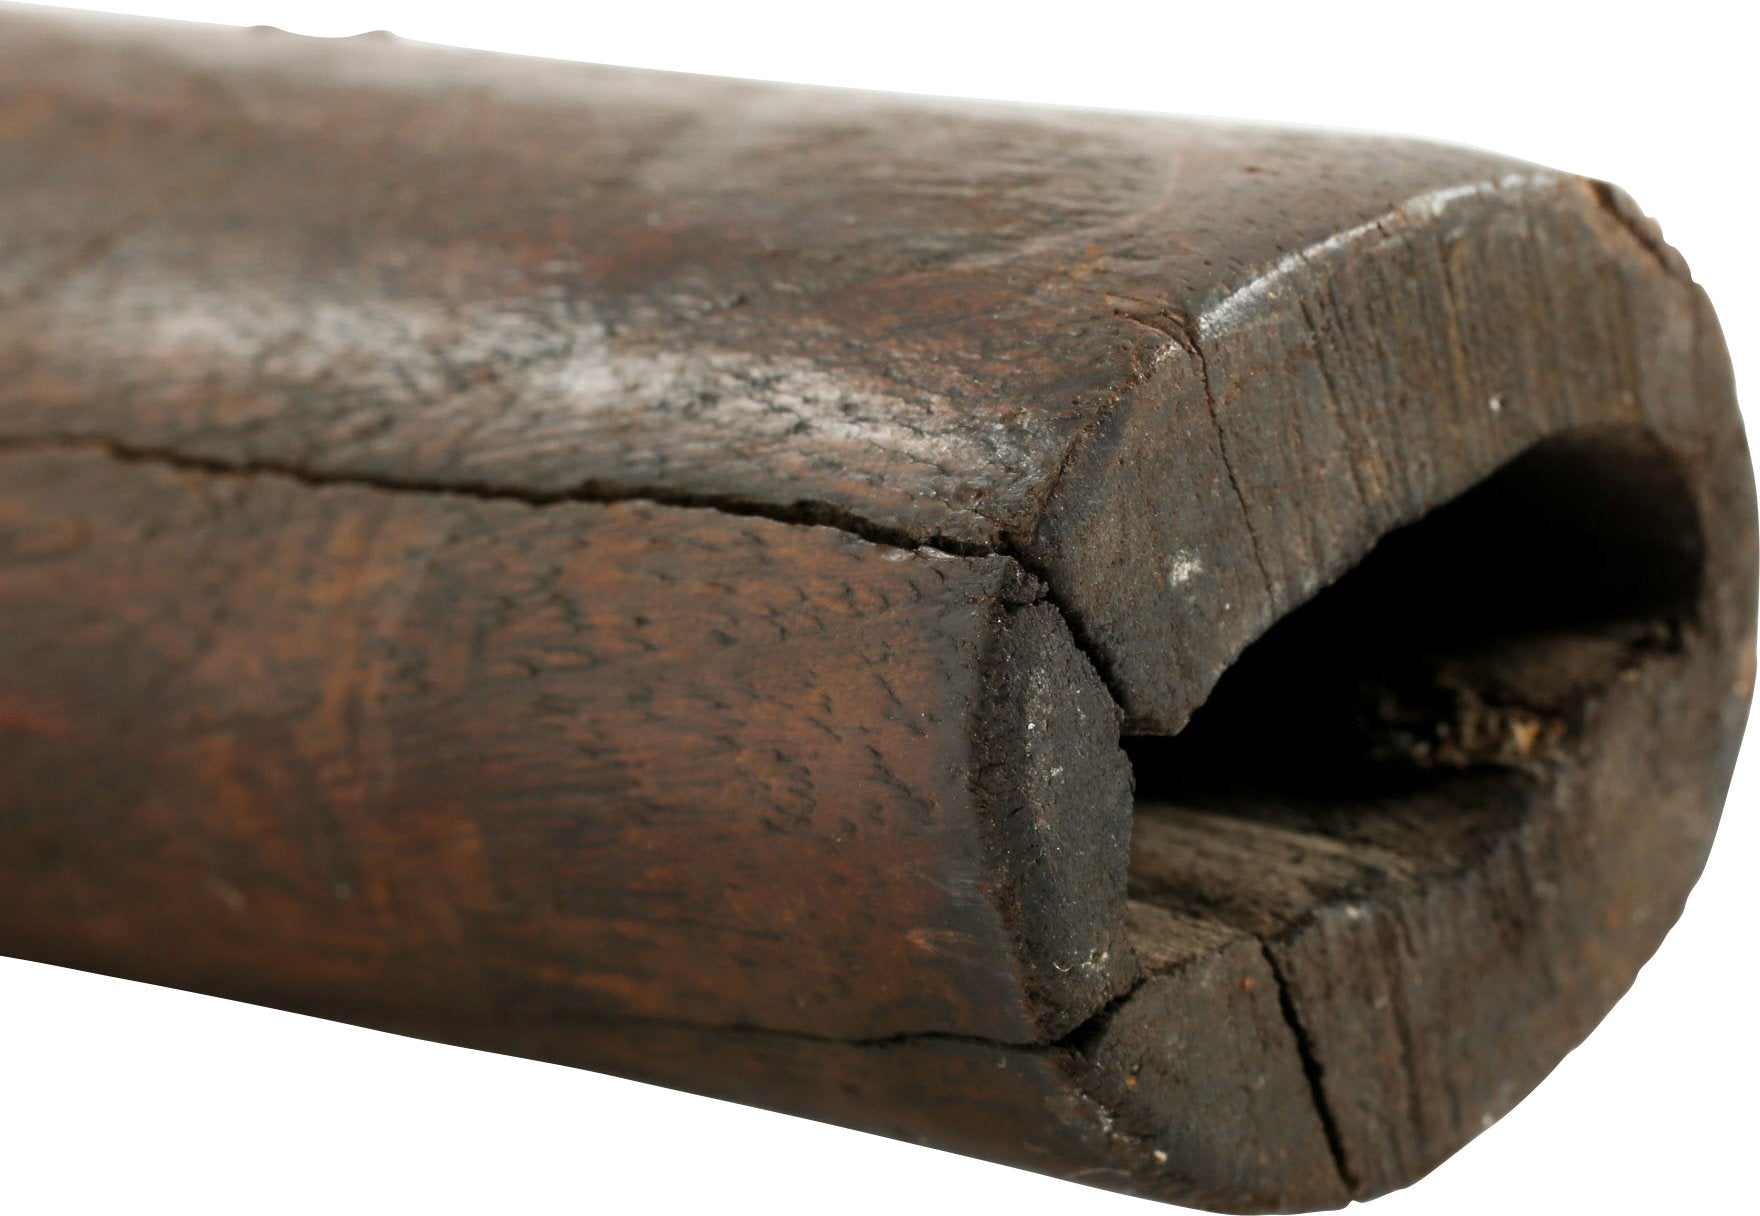 GRIP FROM A 2 HAND SWORD OF 1600 - Fagan Arms